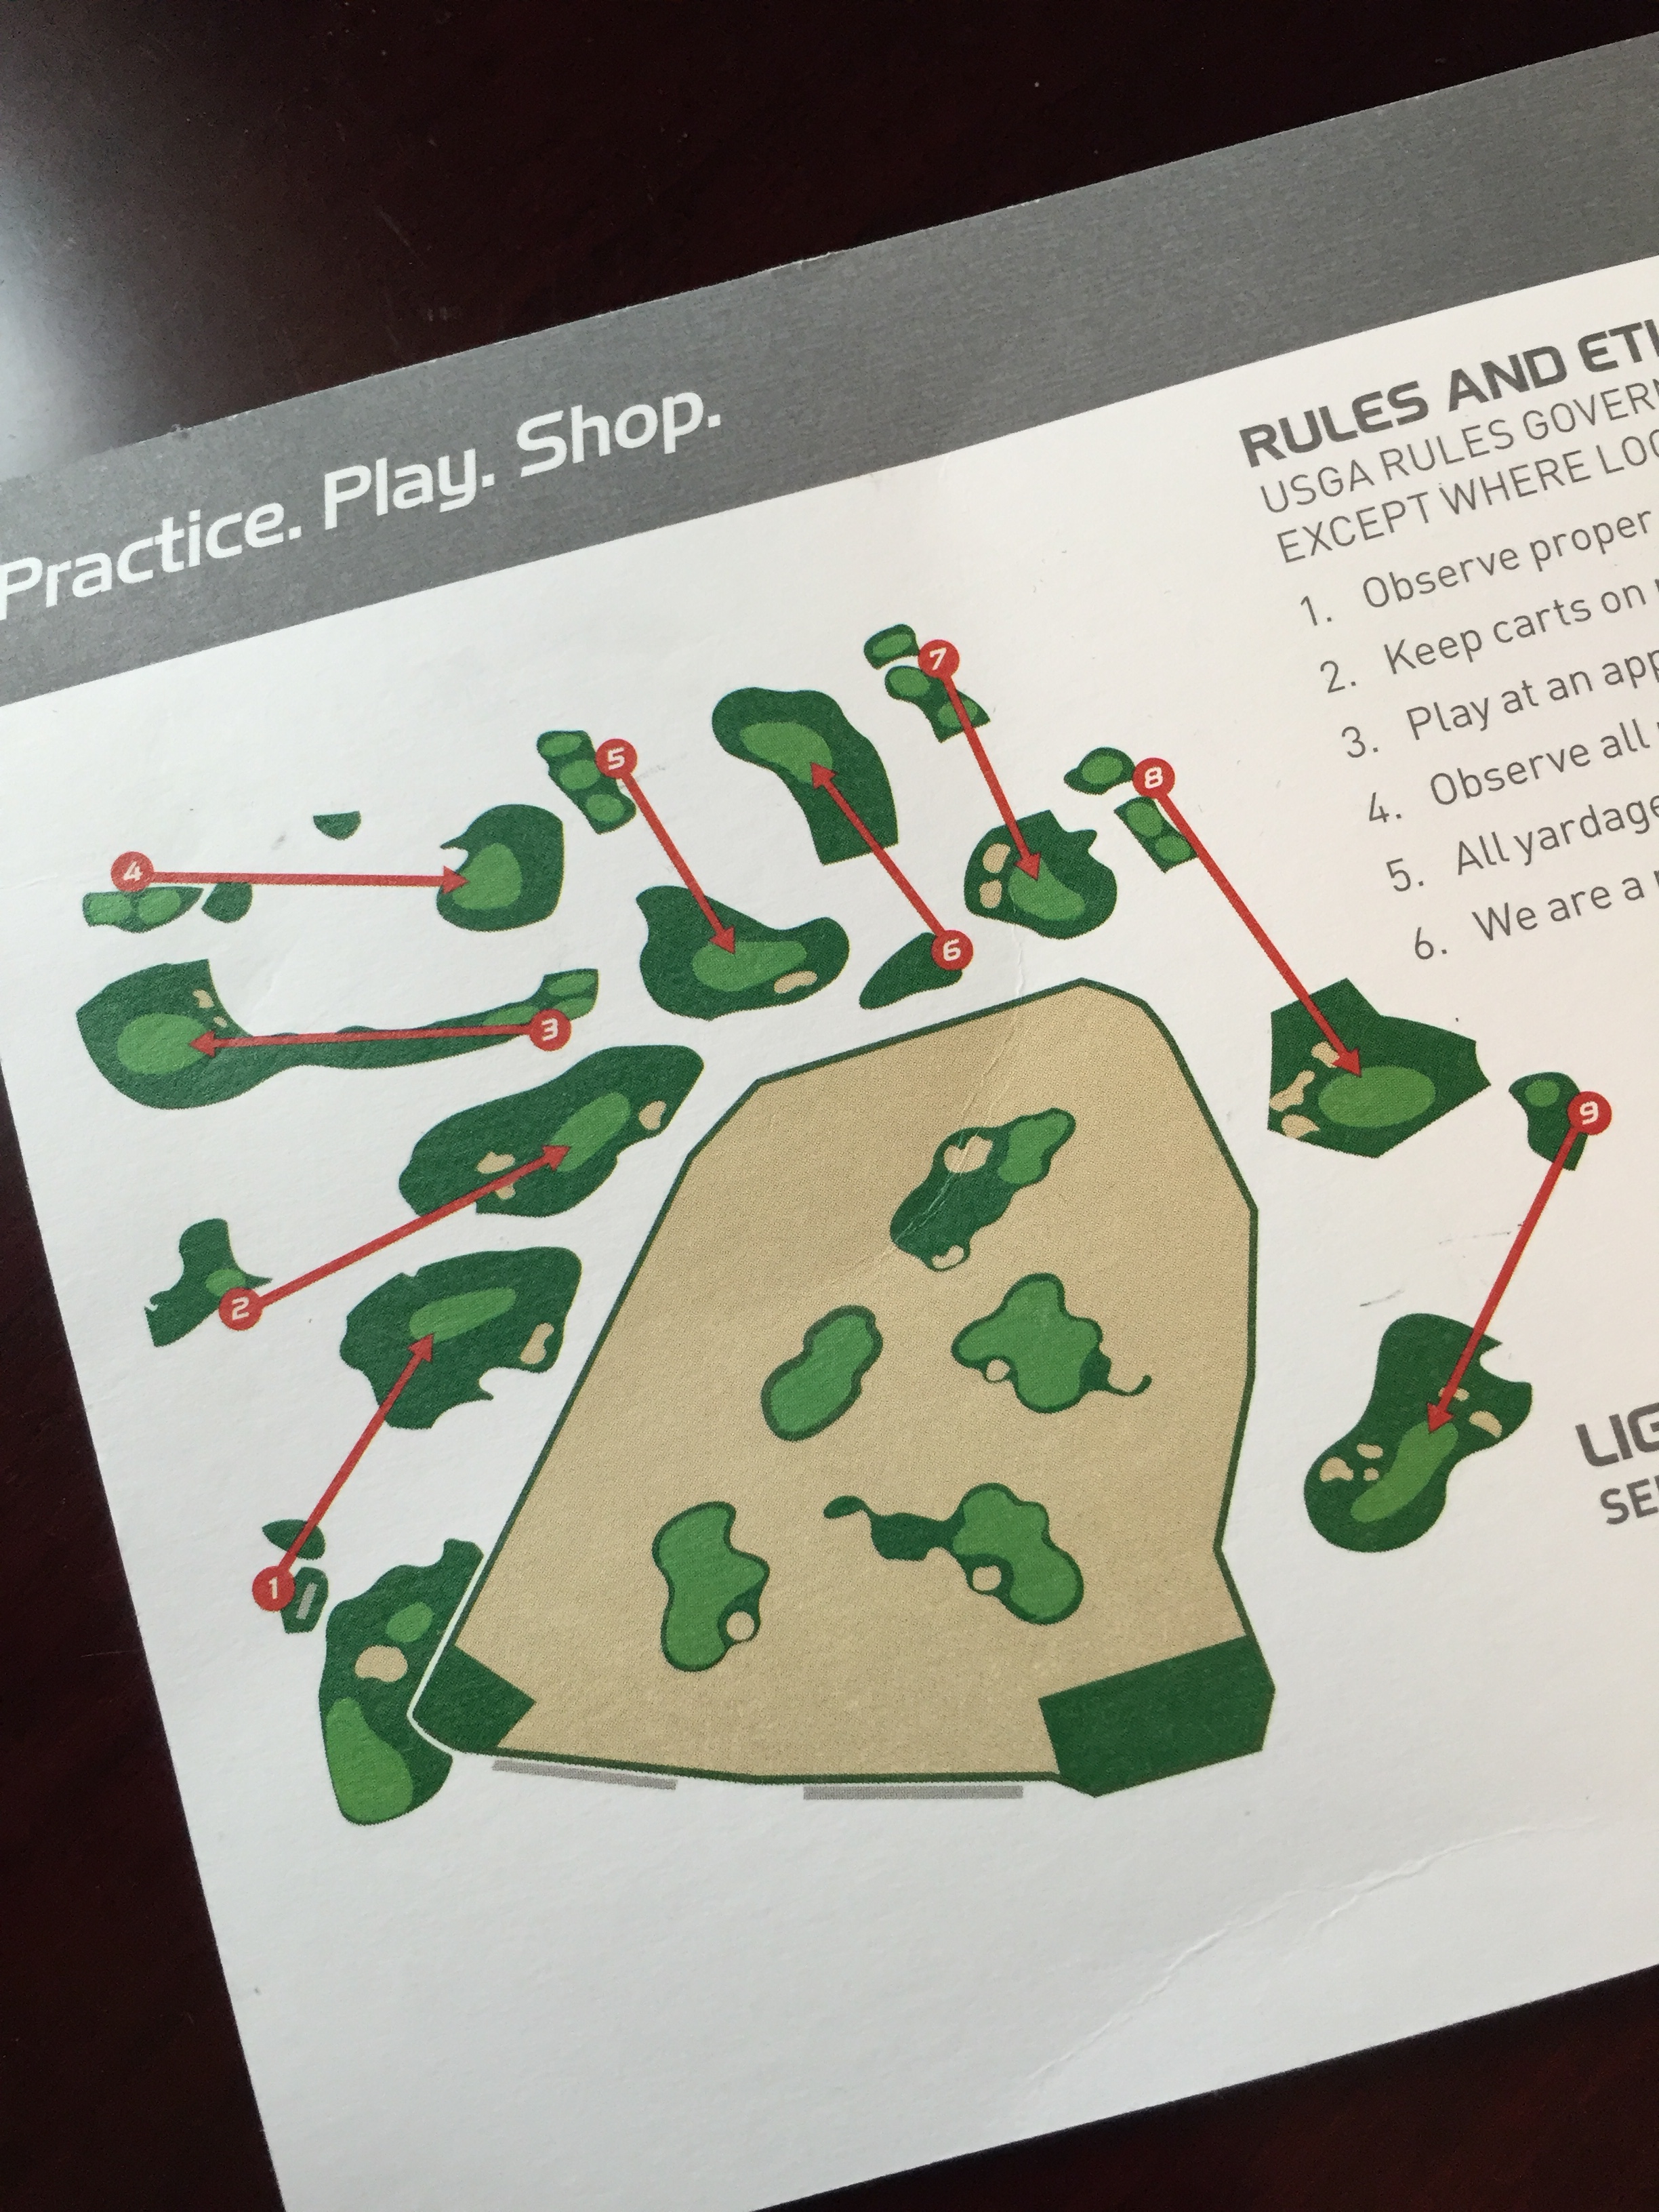 Taylormade Golf Experience map